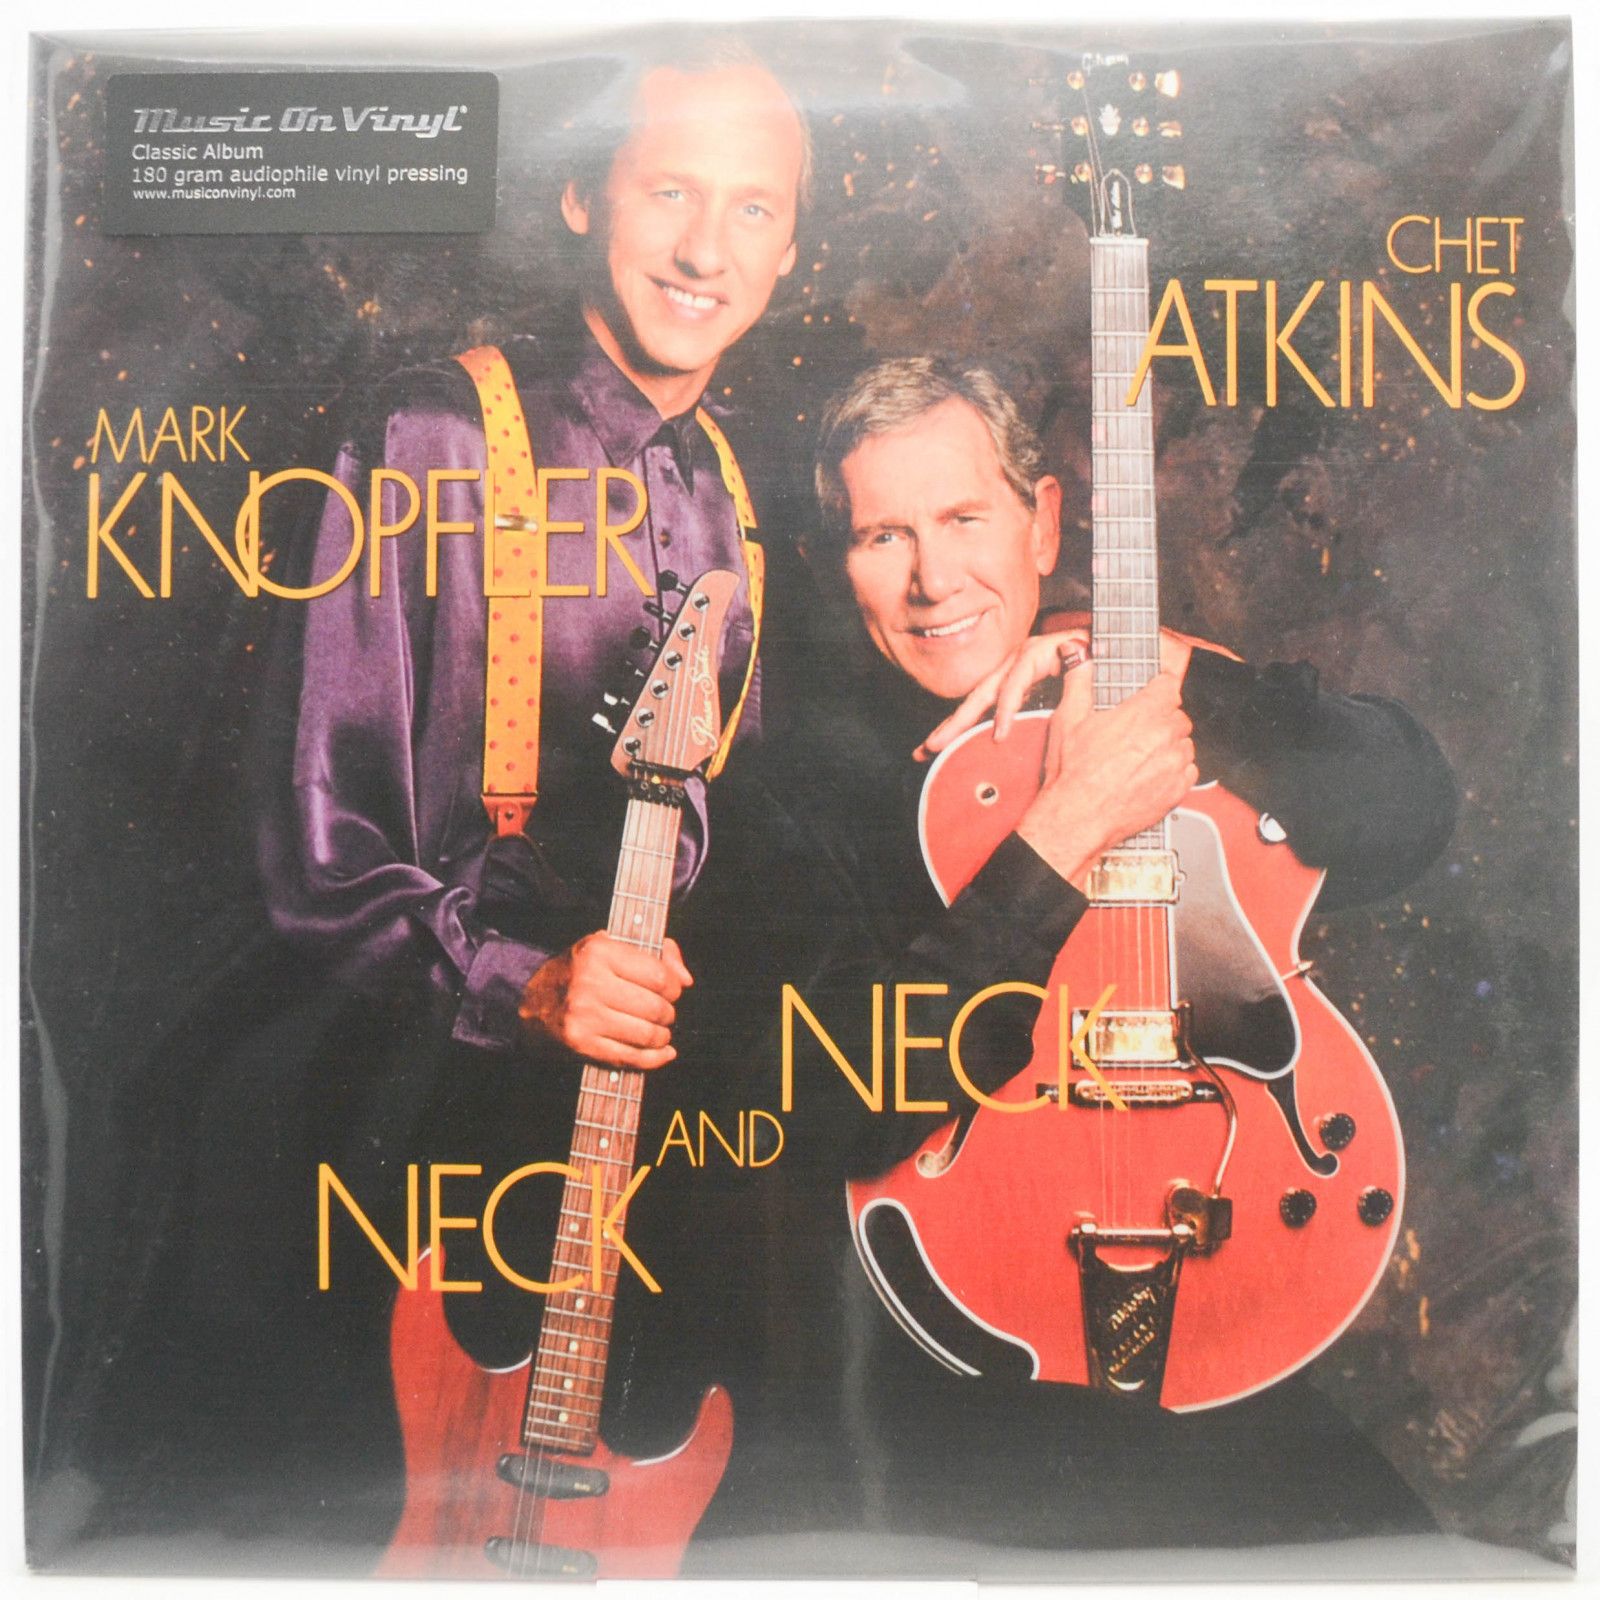 Chet Atkins And Mark Knopfler — Neck And Neck, 1990